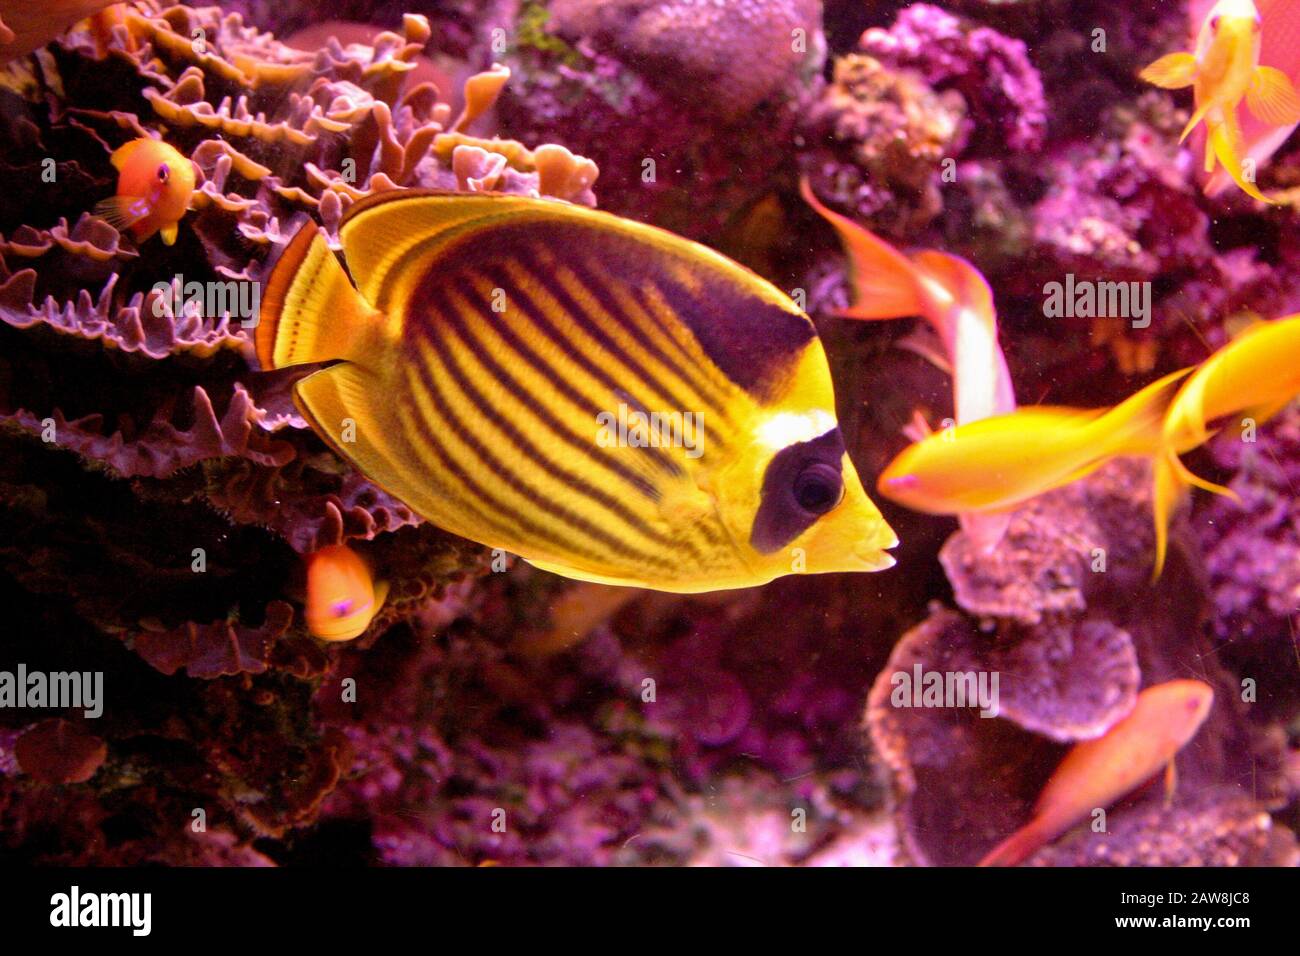 Diagonal Butterflyfish (Chaetodon fasciatus), also known as the Red Sea Raccoon Butterflyfish. This species of butterflyfish (family Chaetodontidae) i Stock Photo